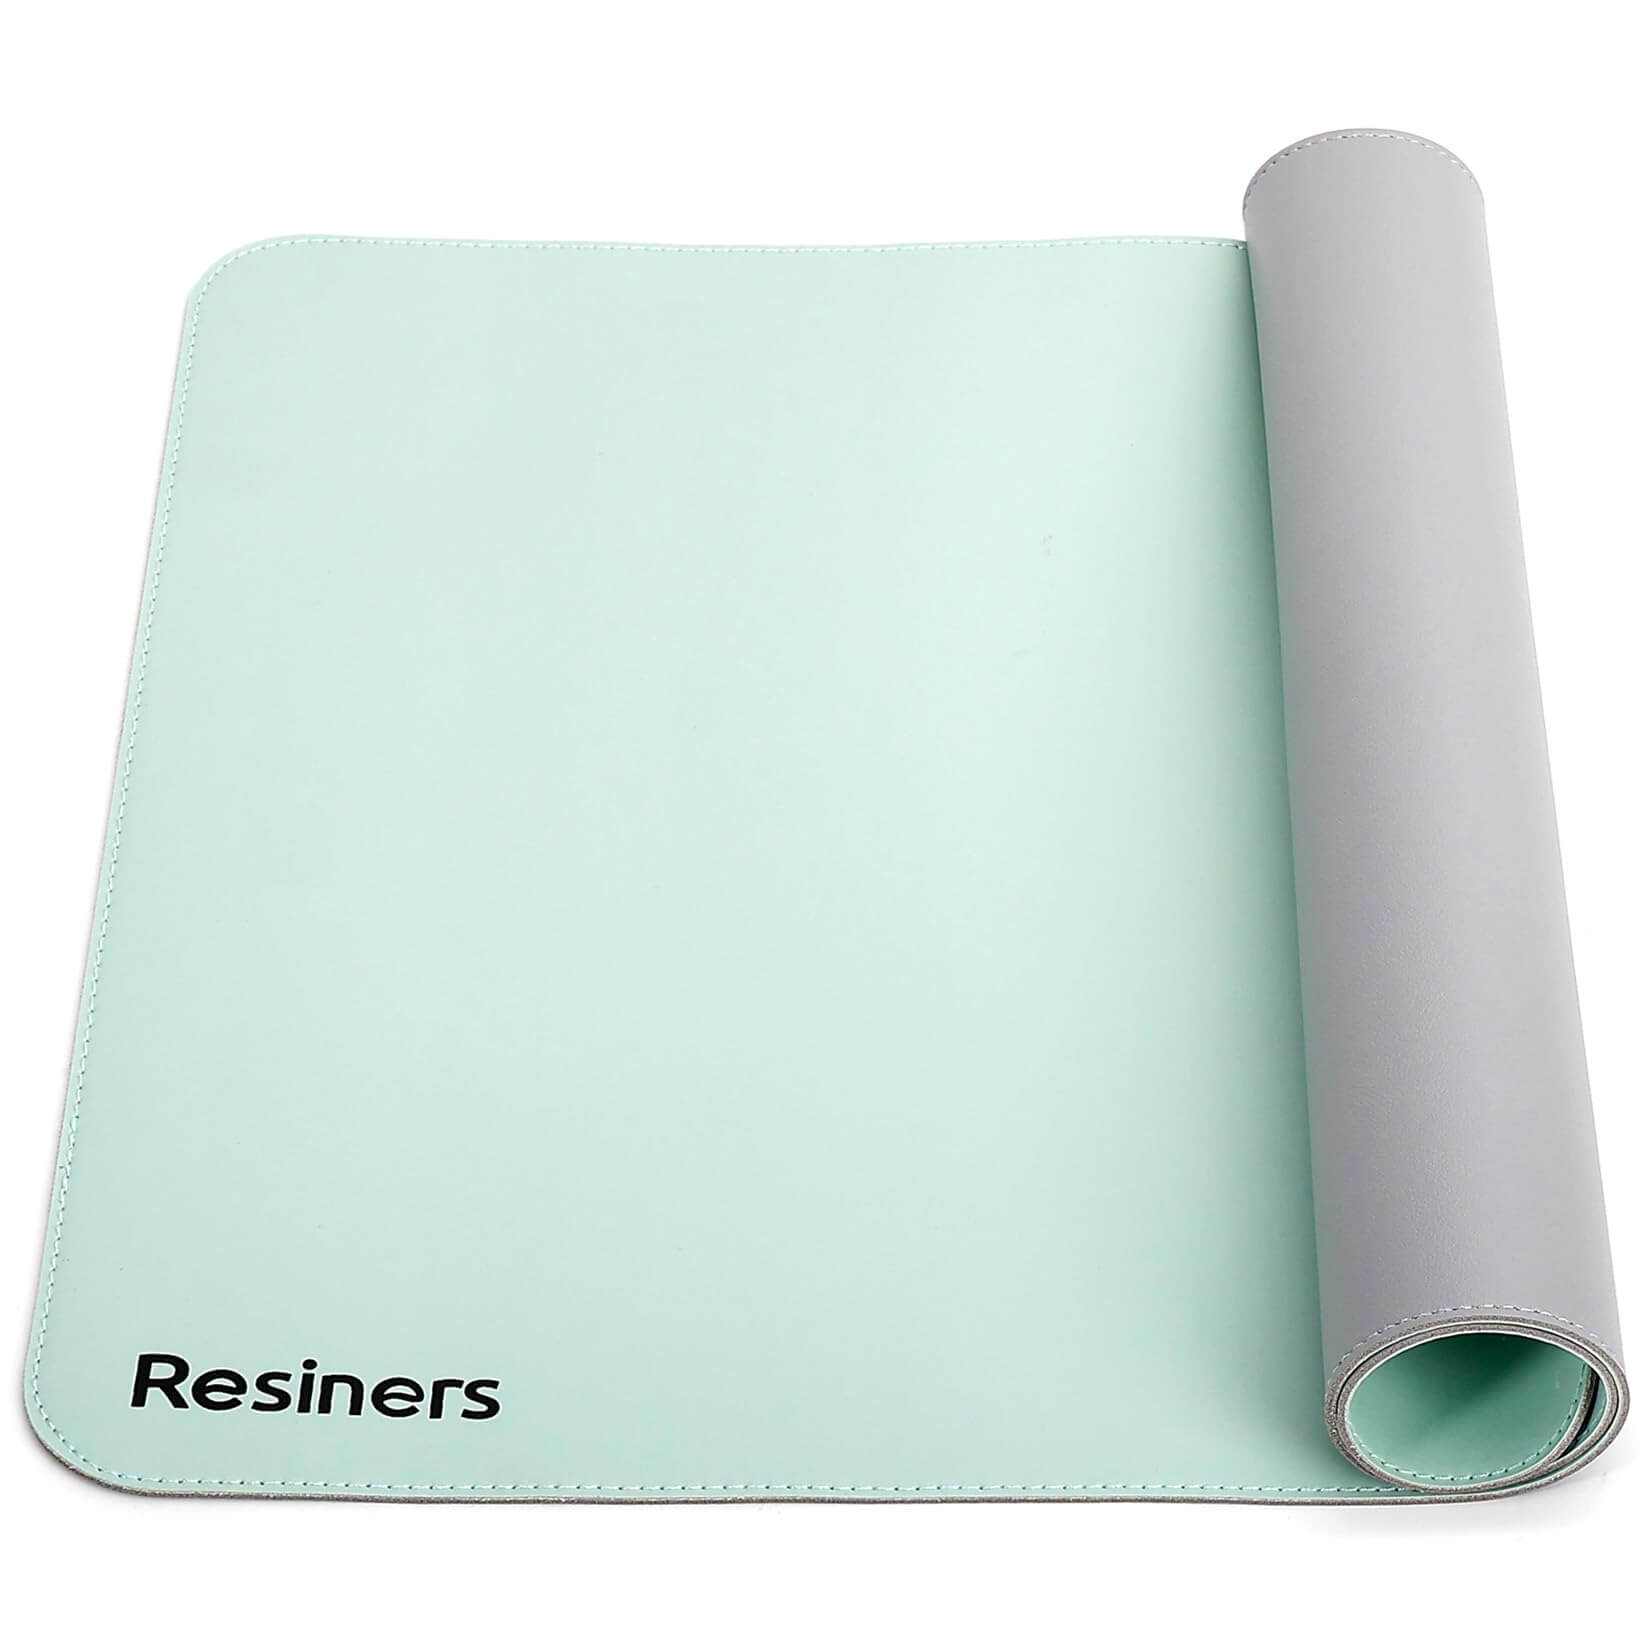 Resiners® Nonstick Heat-Resistant Leather Craft Mat, Double Sided Extra  Large Silicone-Leather Craft Mat, 26.4×15.7 Resin Jewelry Casting Mats,  Work Pat